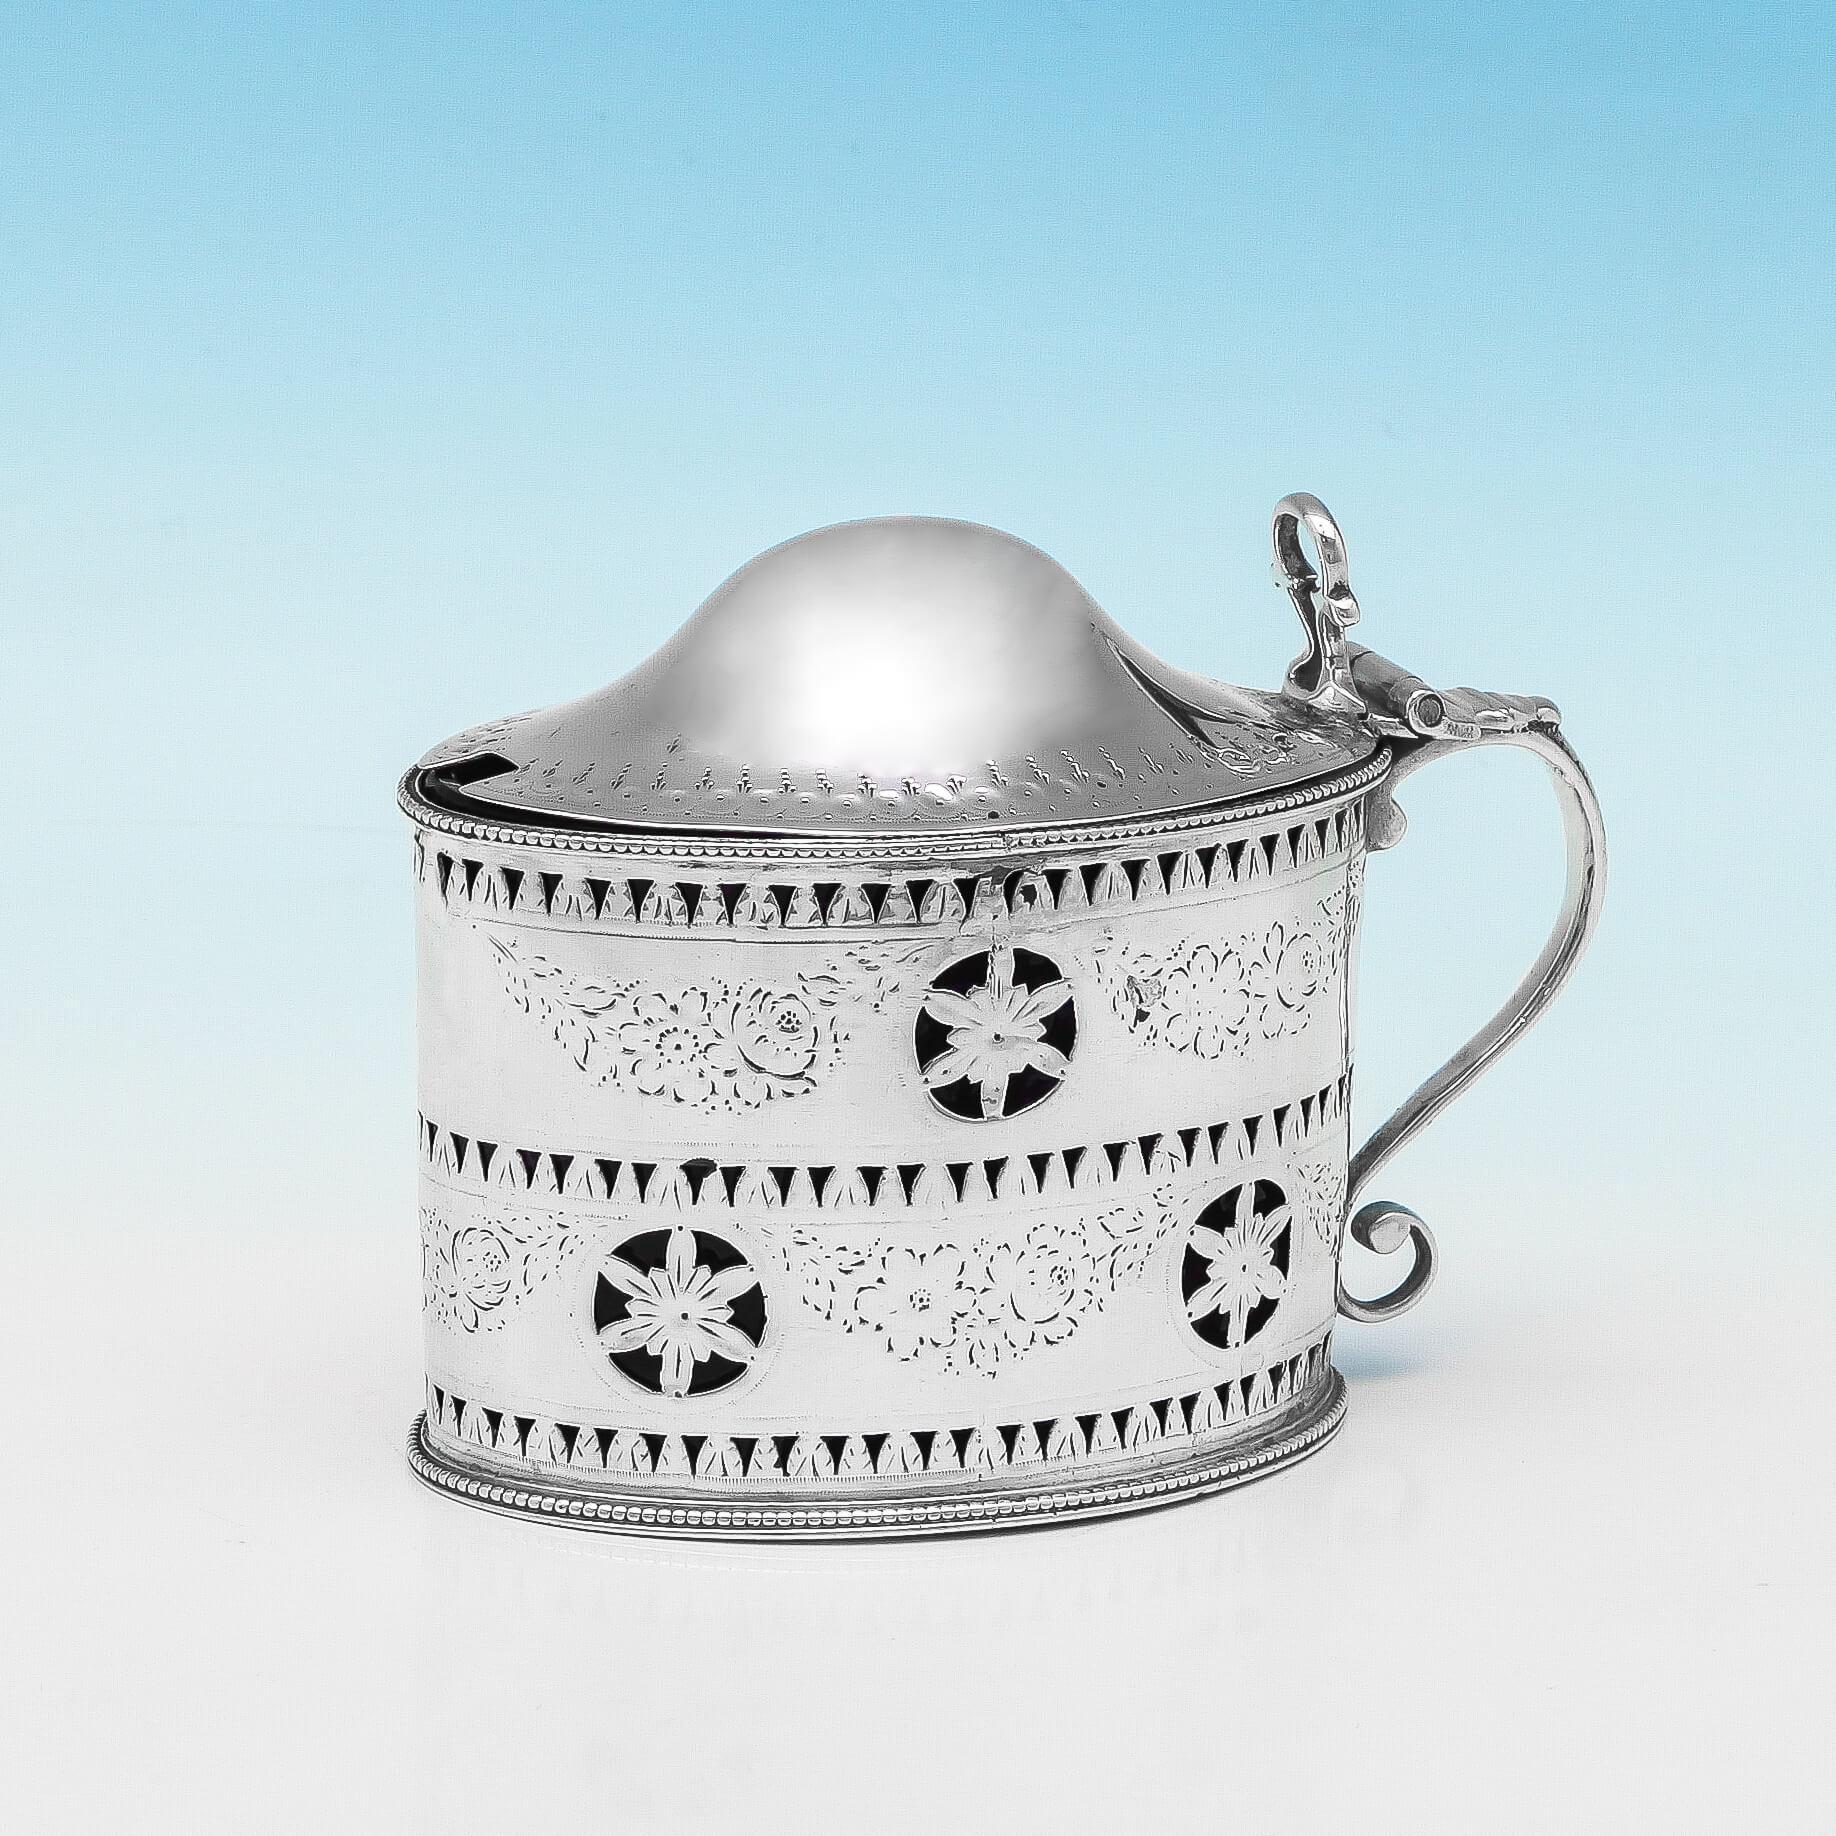 Hallmarked in London in 1787 by Hester Bateman, this handsome George III, antique, sterling silver mustard pot has floral engraving and pierced decoration, typical of Bateman's style. Featuring a domed, hinged lid and a blue glass liner, the mustard